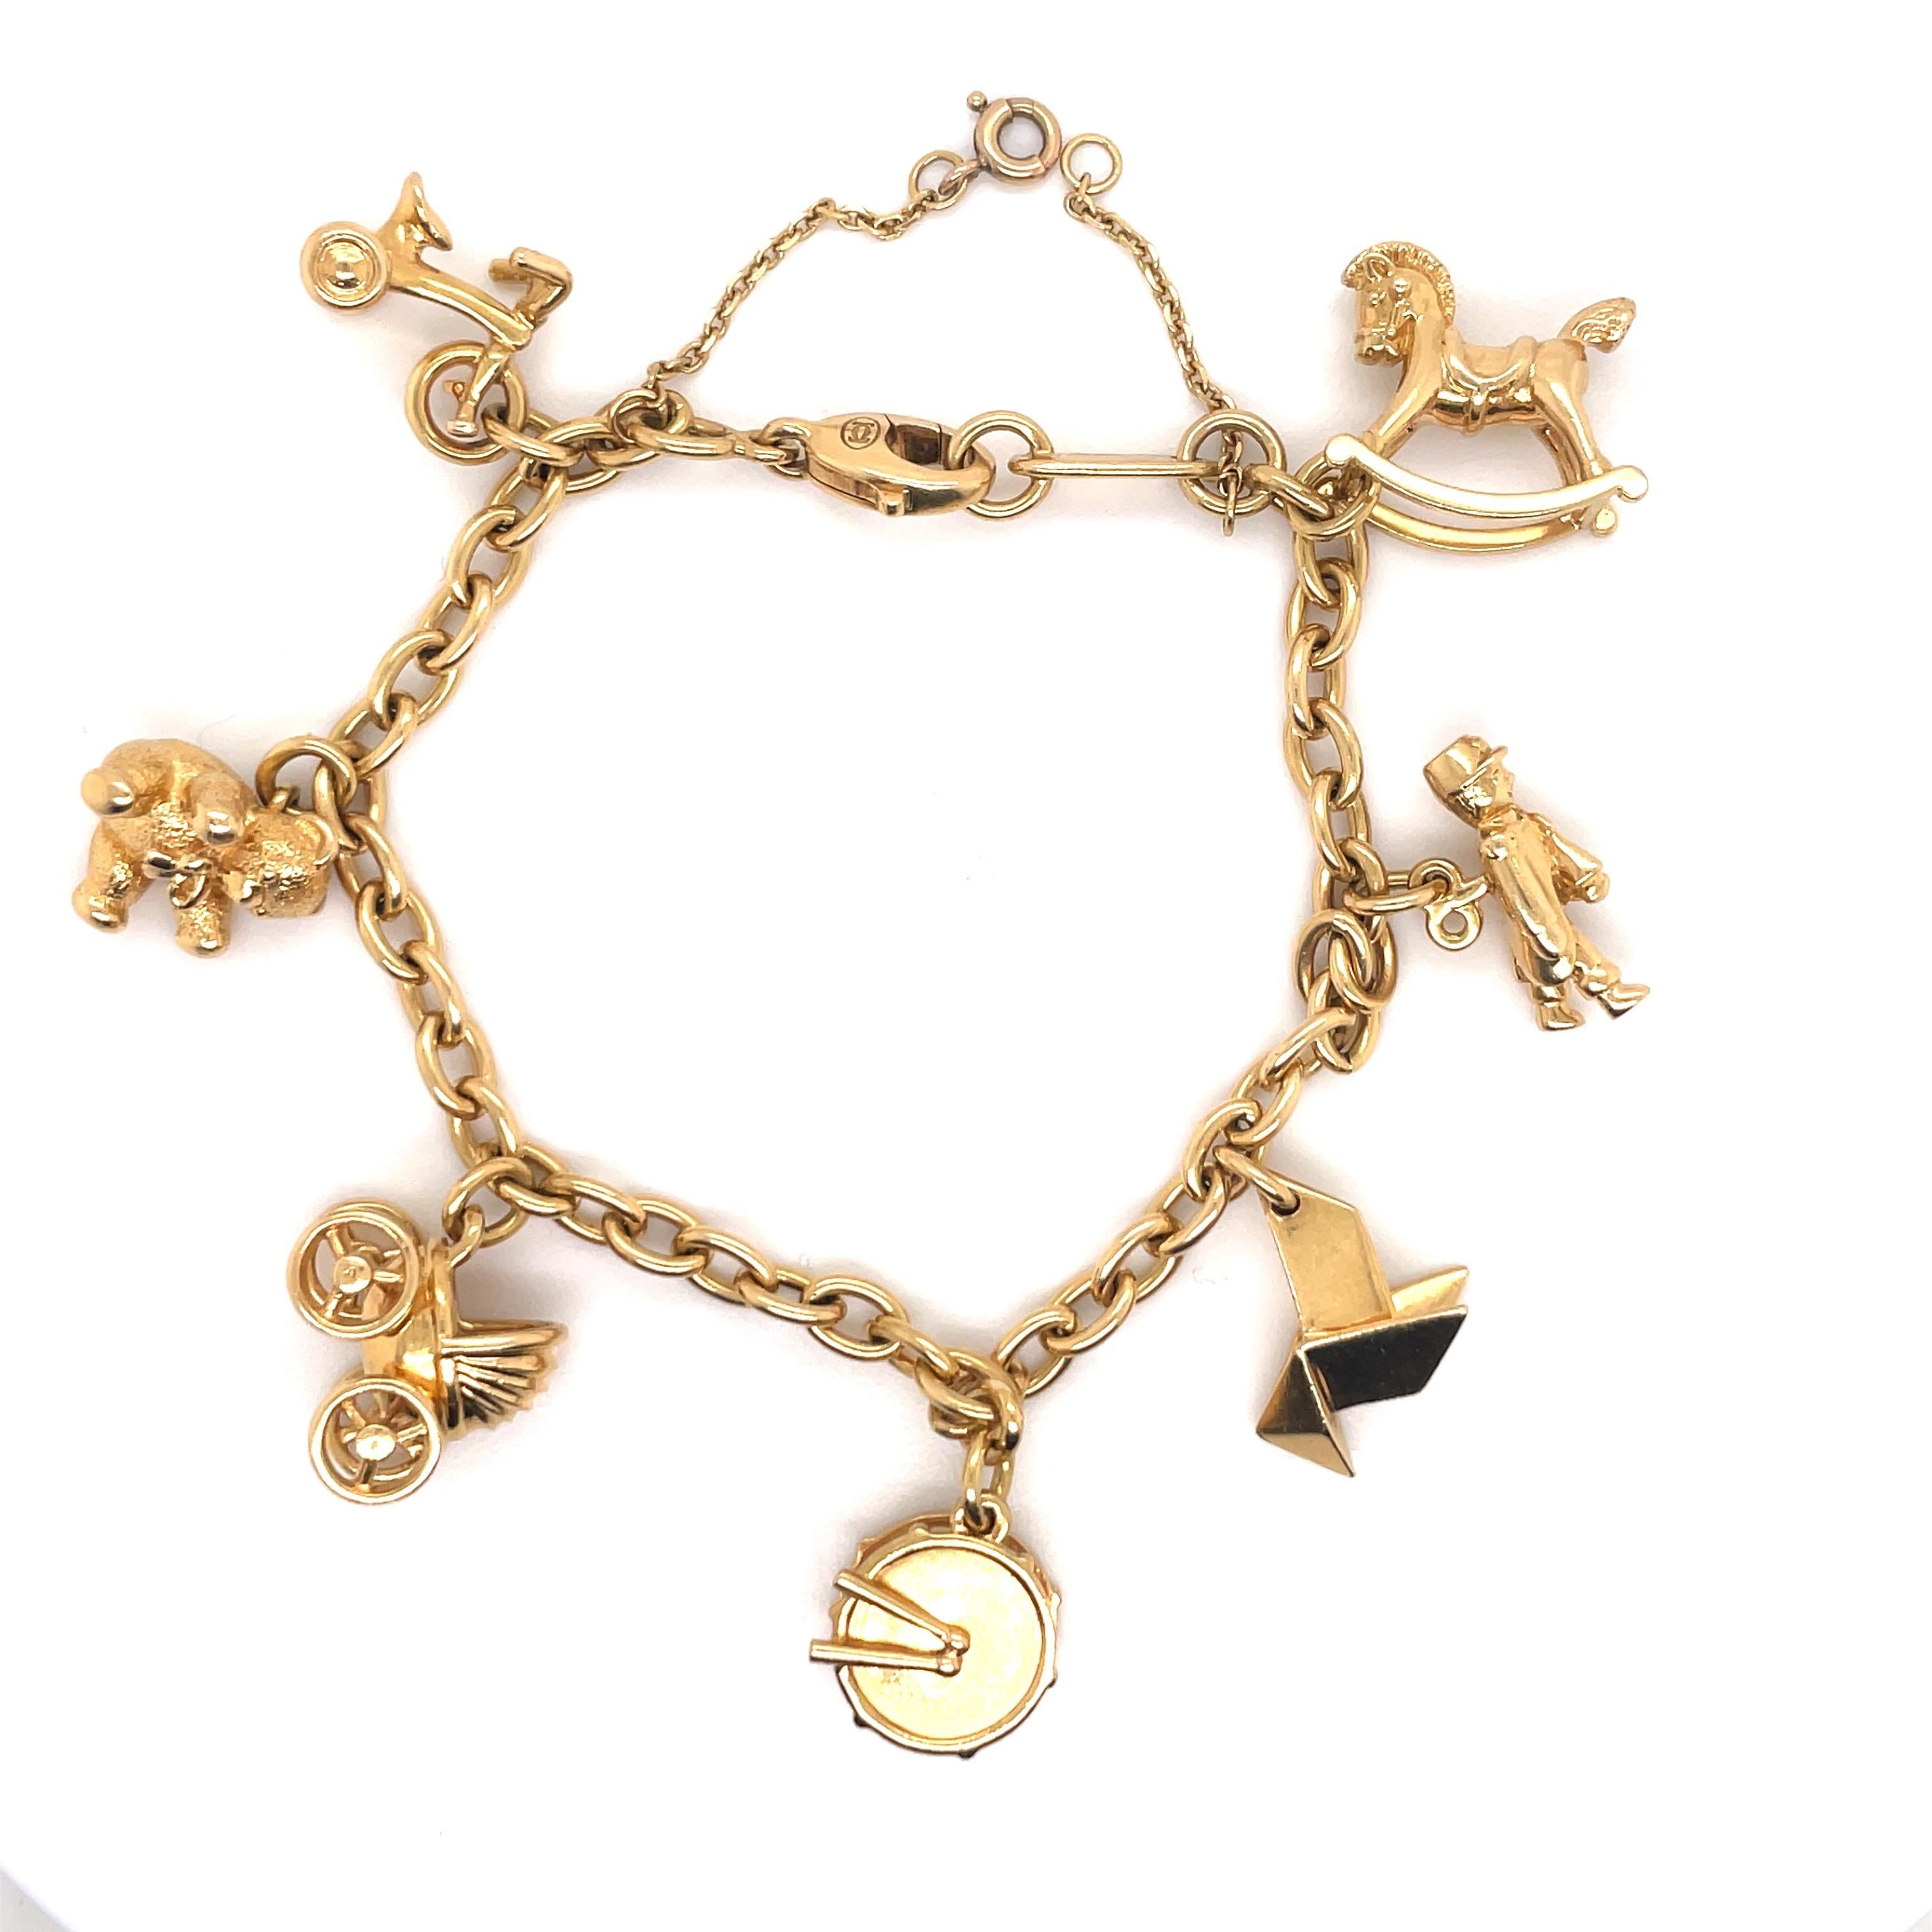 Cartier link bracelet featuring 7 charms crafted in 18 Karat yellow gold. 
Lists of Charms:
Bicycle
Teddy Bear
Baby Carriage
Drums
Origami 
Military Man
Rocking Horse 